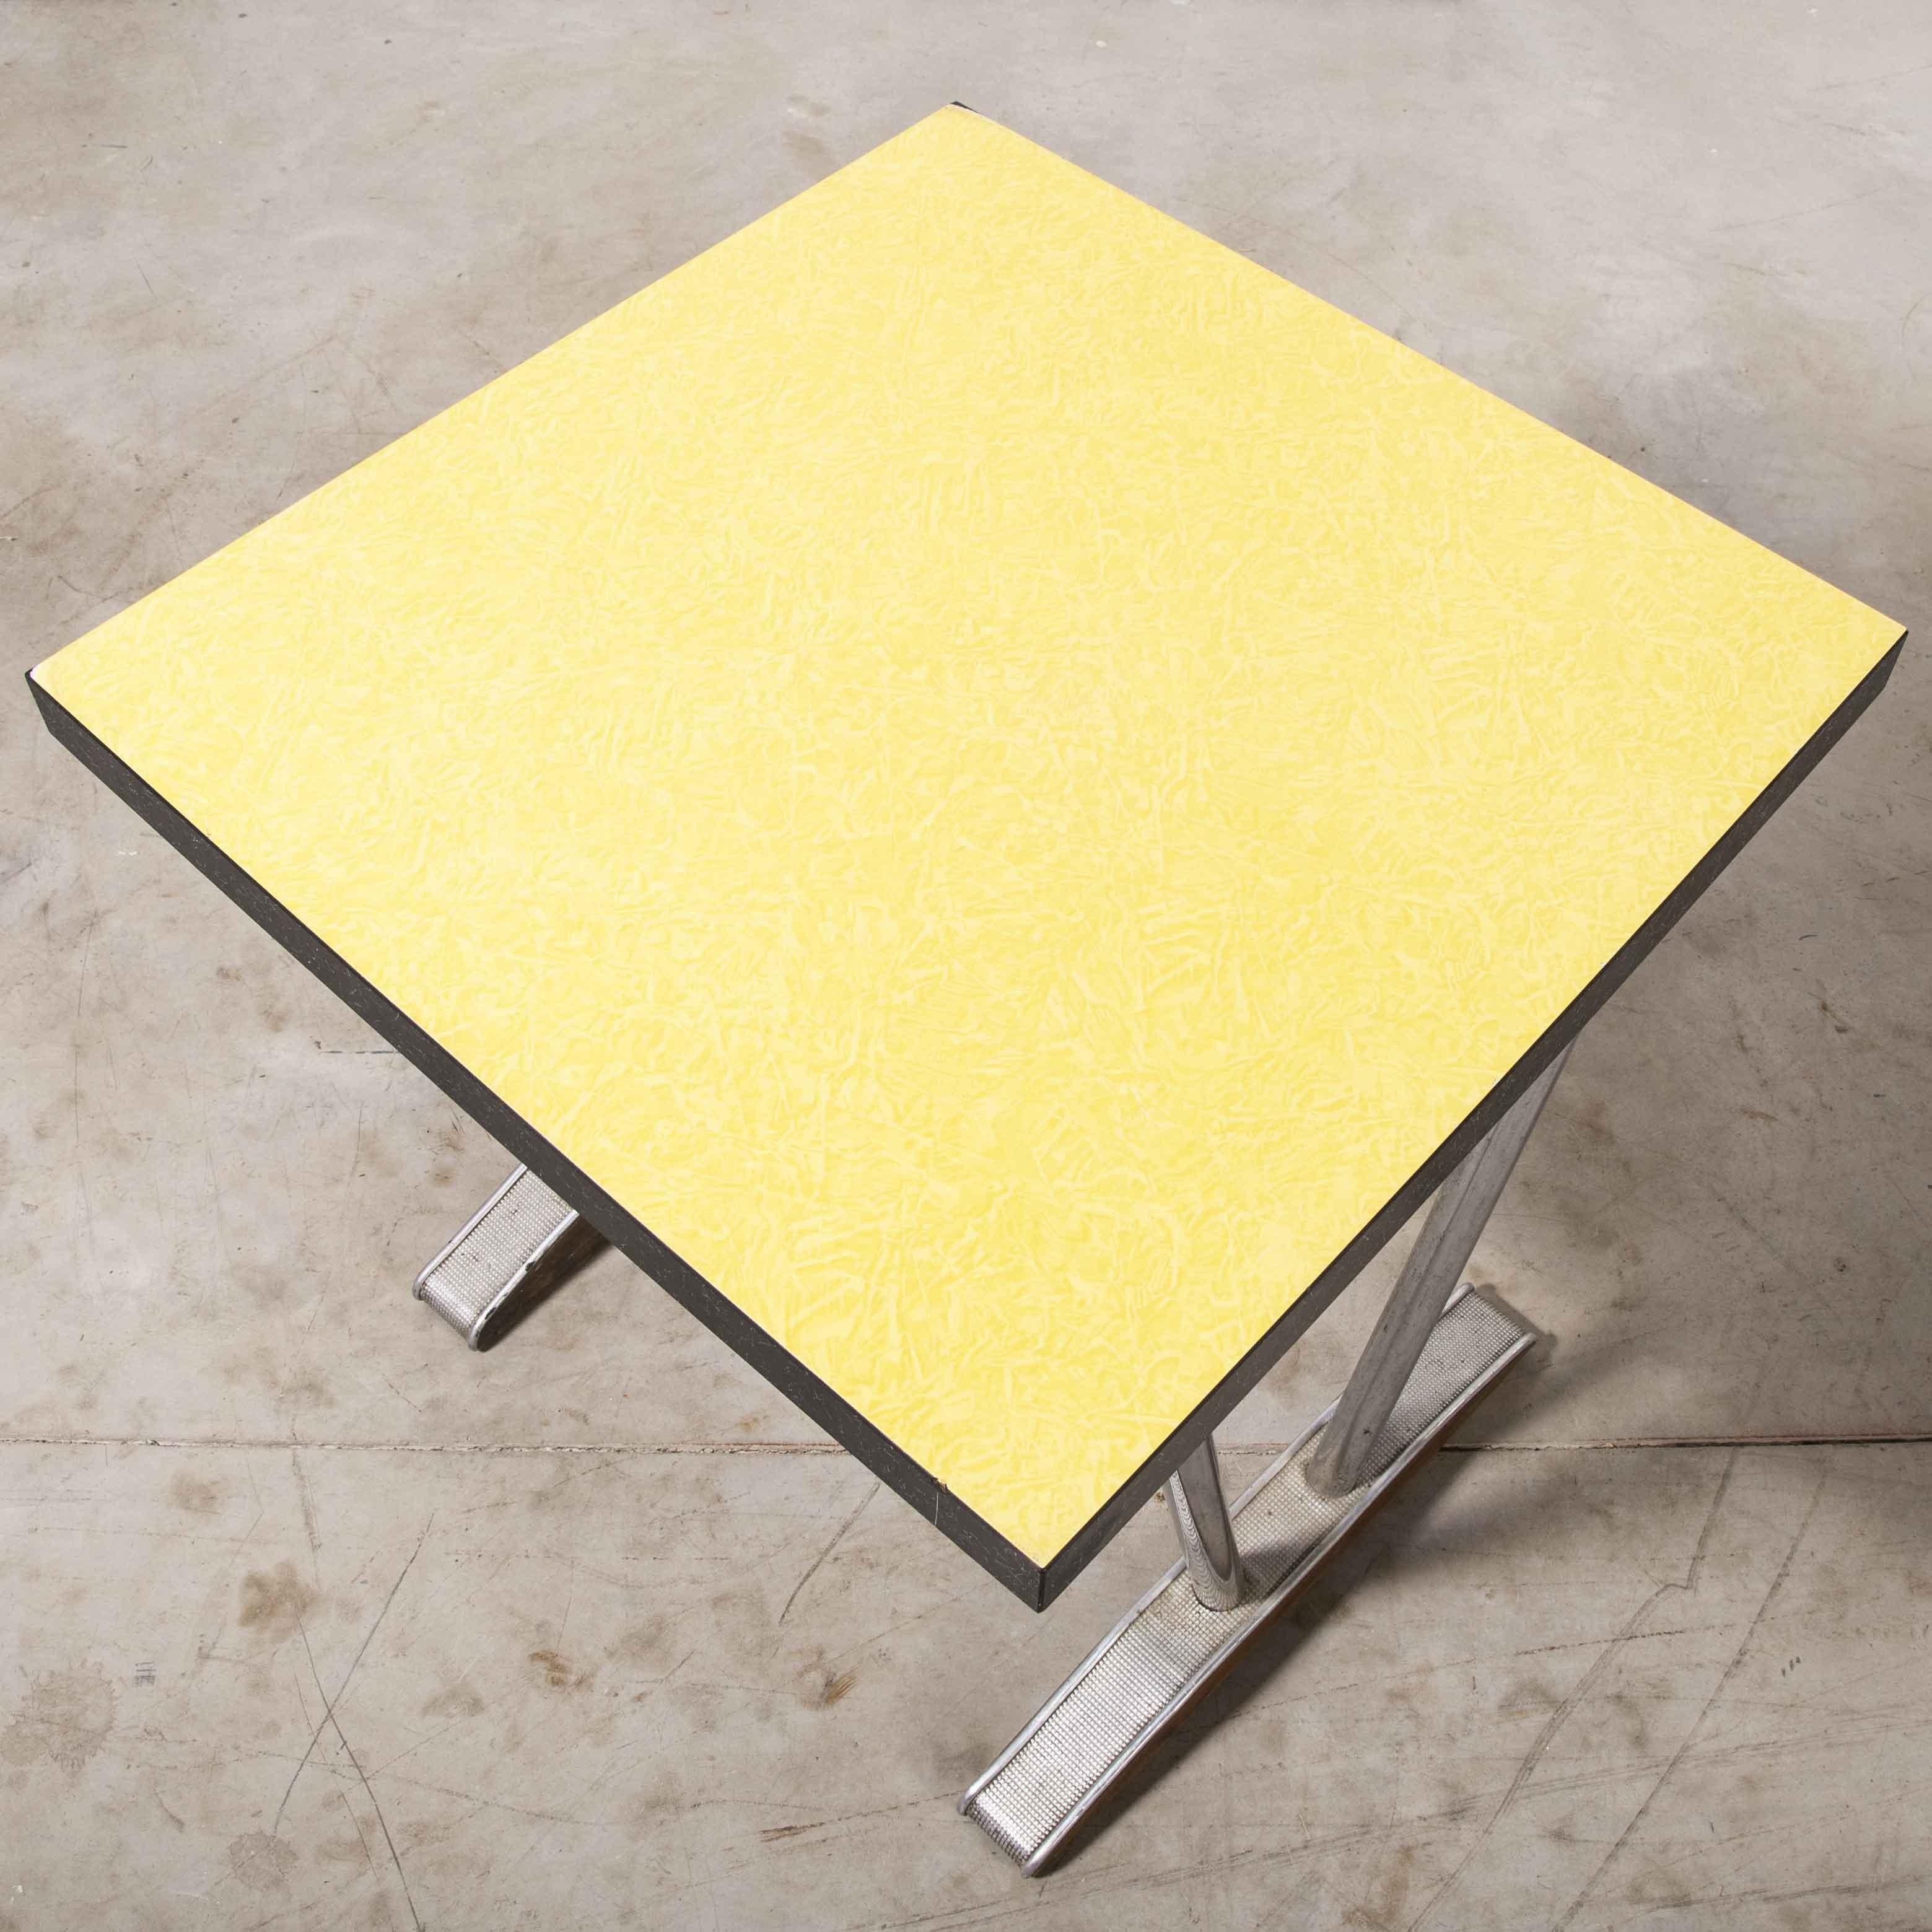 1960’s French Yellow Laminate Café Table with Aluminium Base, Square 3